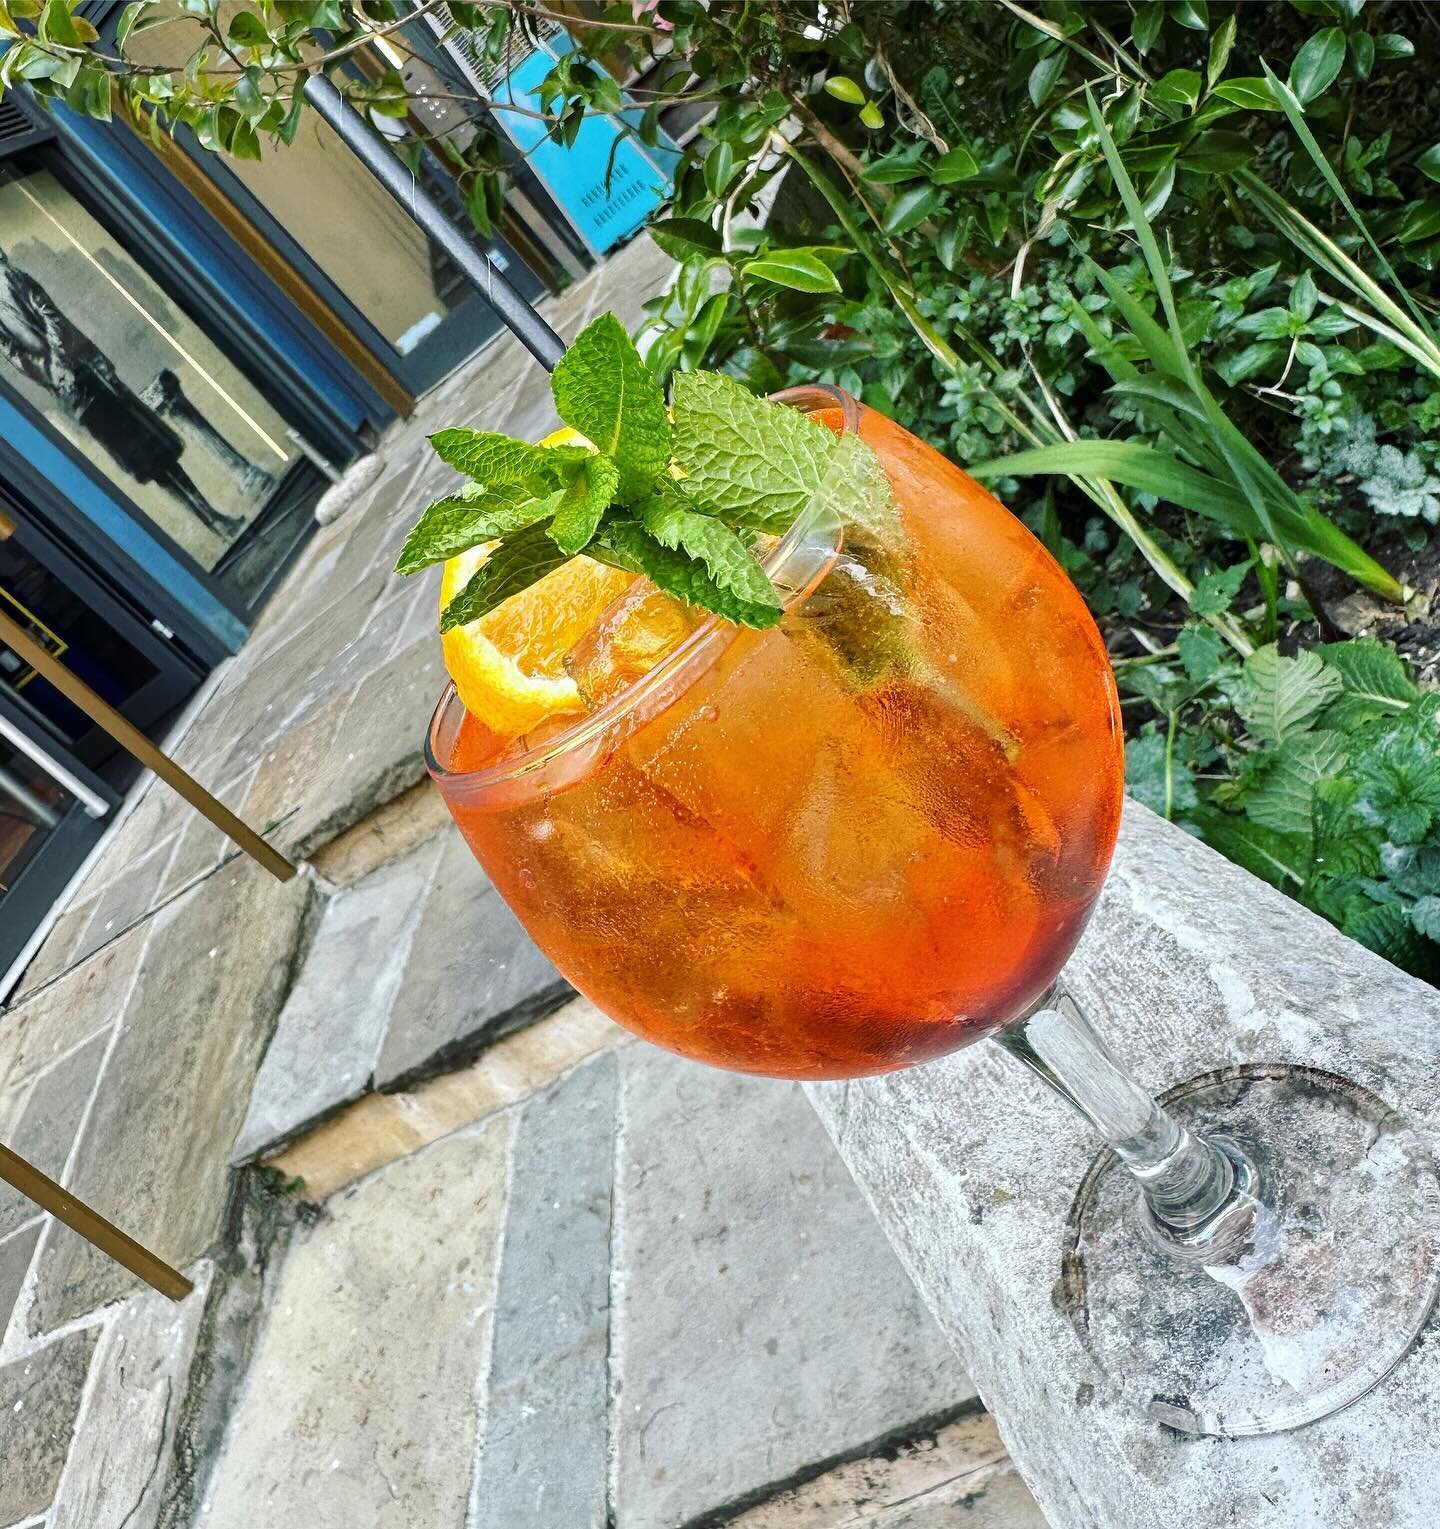 Open tonight for cocktails on the deck! 

#folkestone #folklore #mixology #cocktailbar #latte # cocktail #theoldhighstreetfolkestone #cocktails #cheriton #hythe #dover #sandgate #hawkinge #cafe #coffee #independentbusiness #livemusic